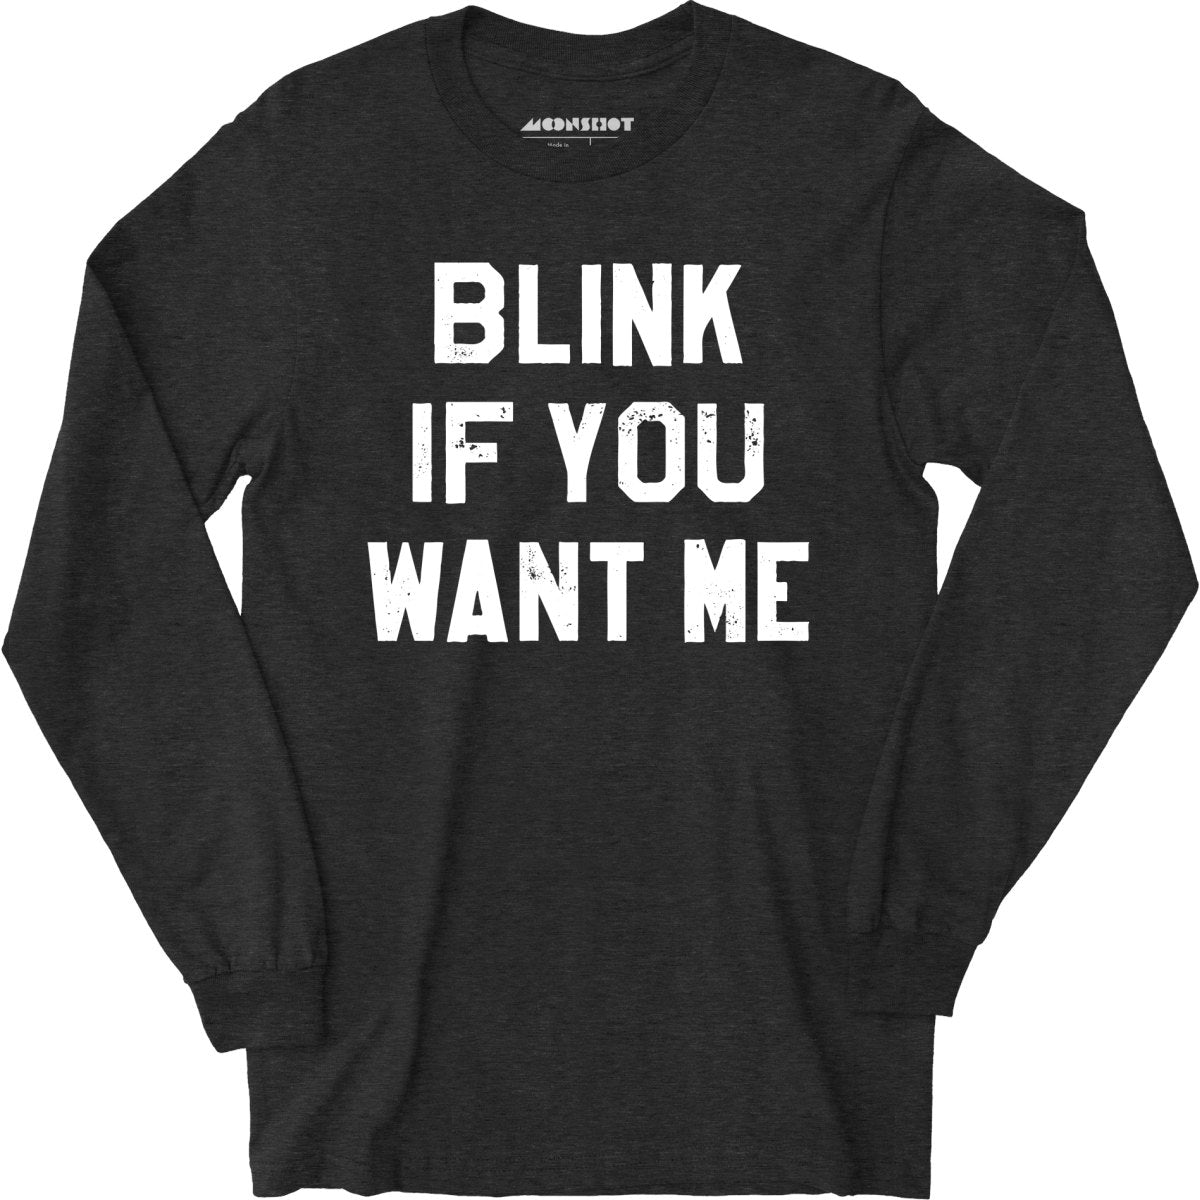 Blink If You Want Me - Long Sleeve T-Shirt